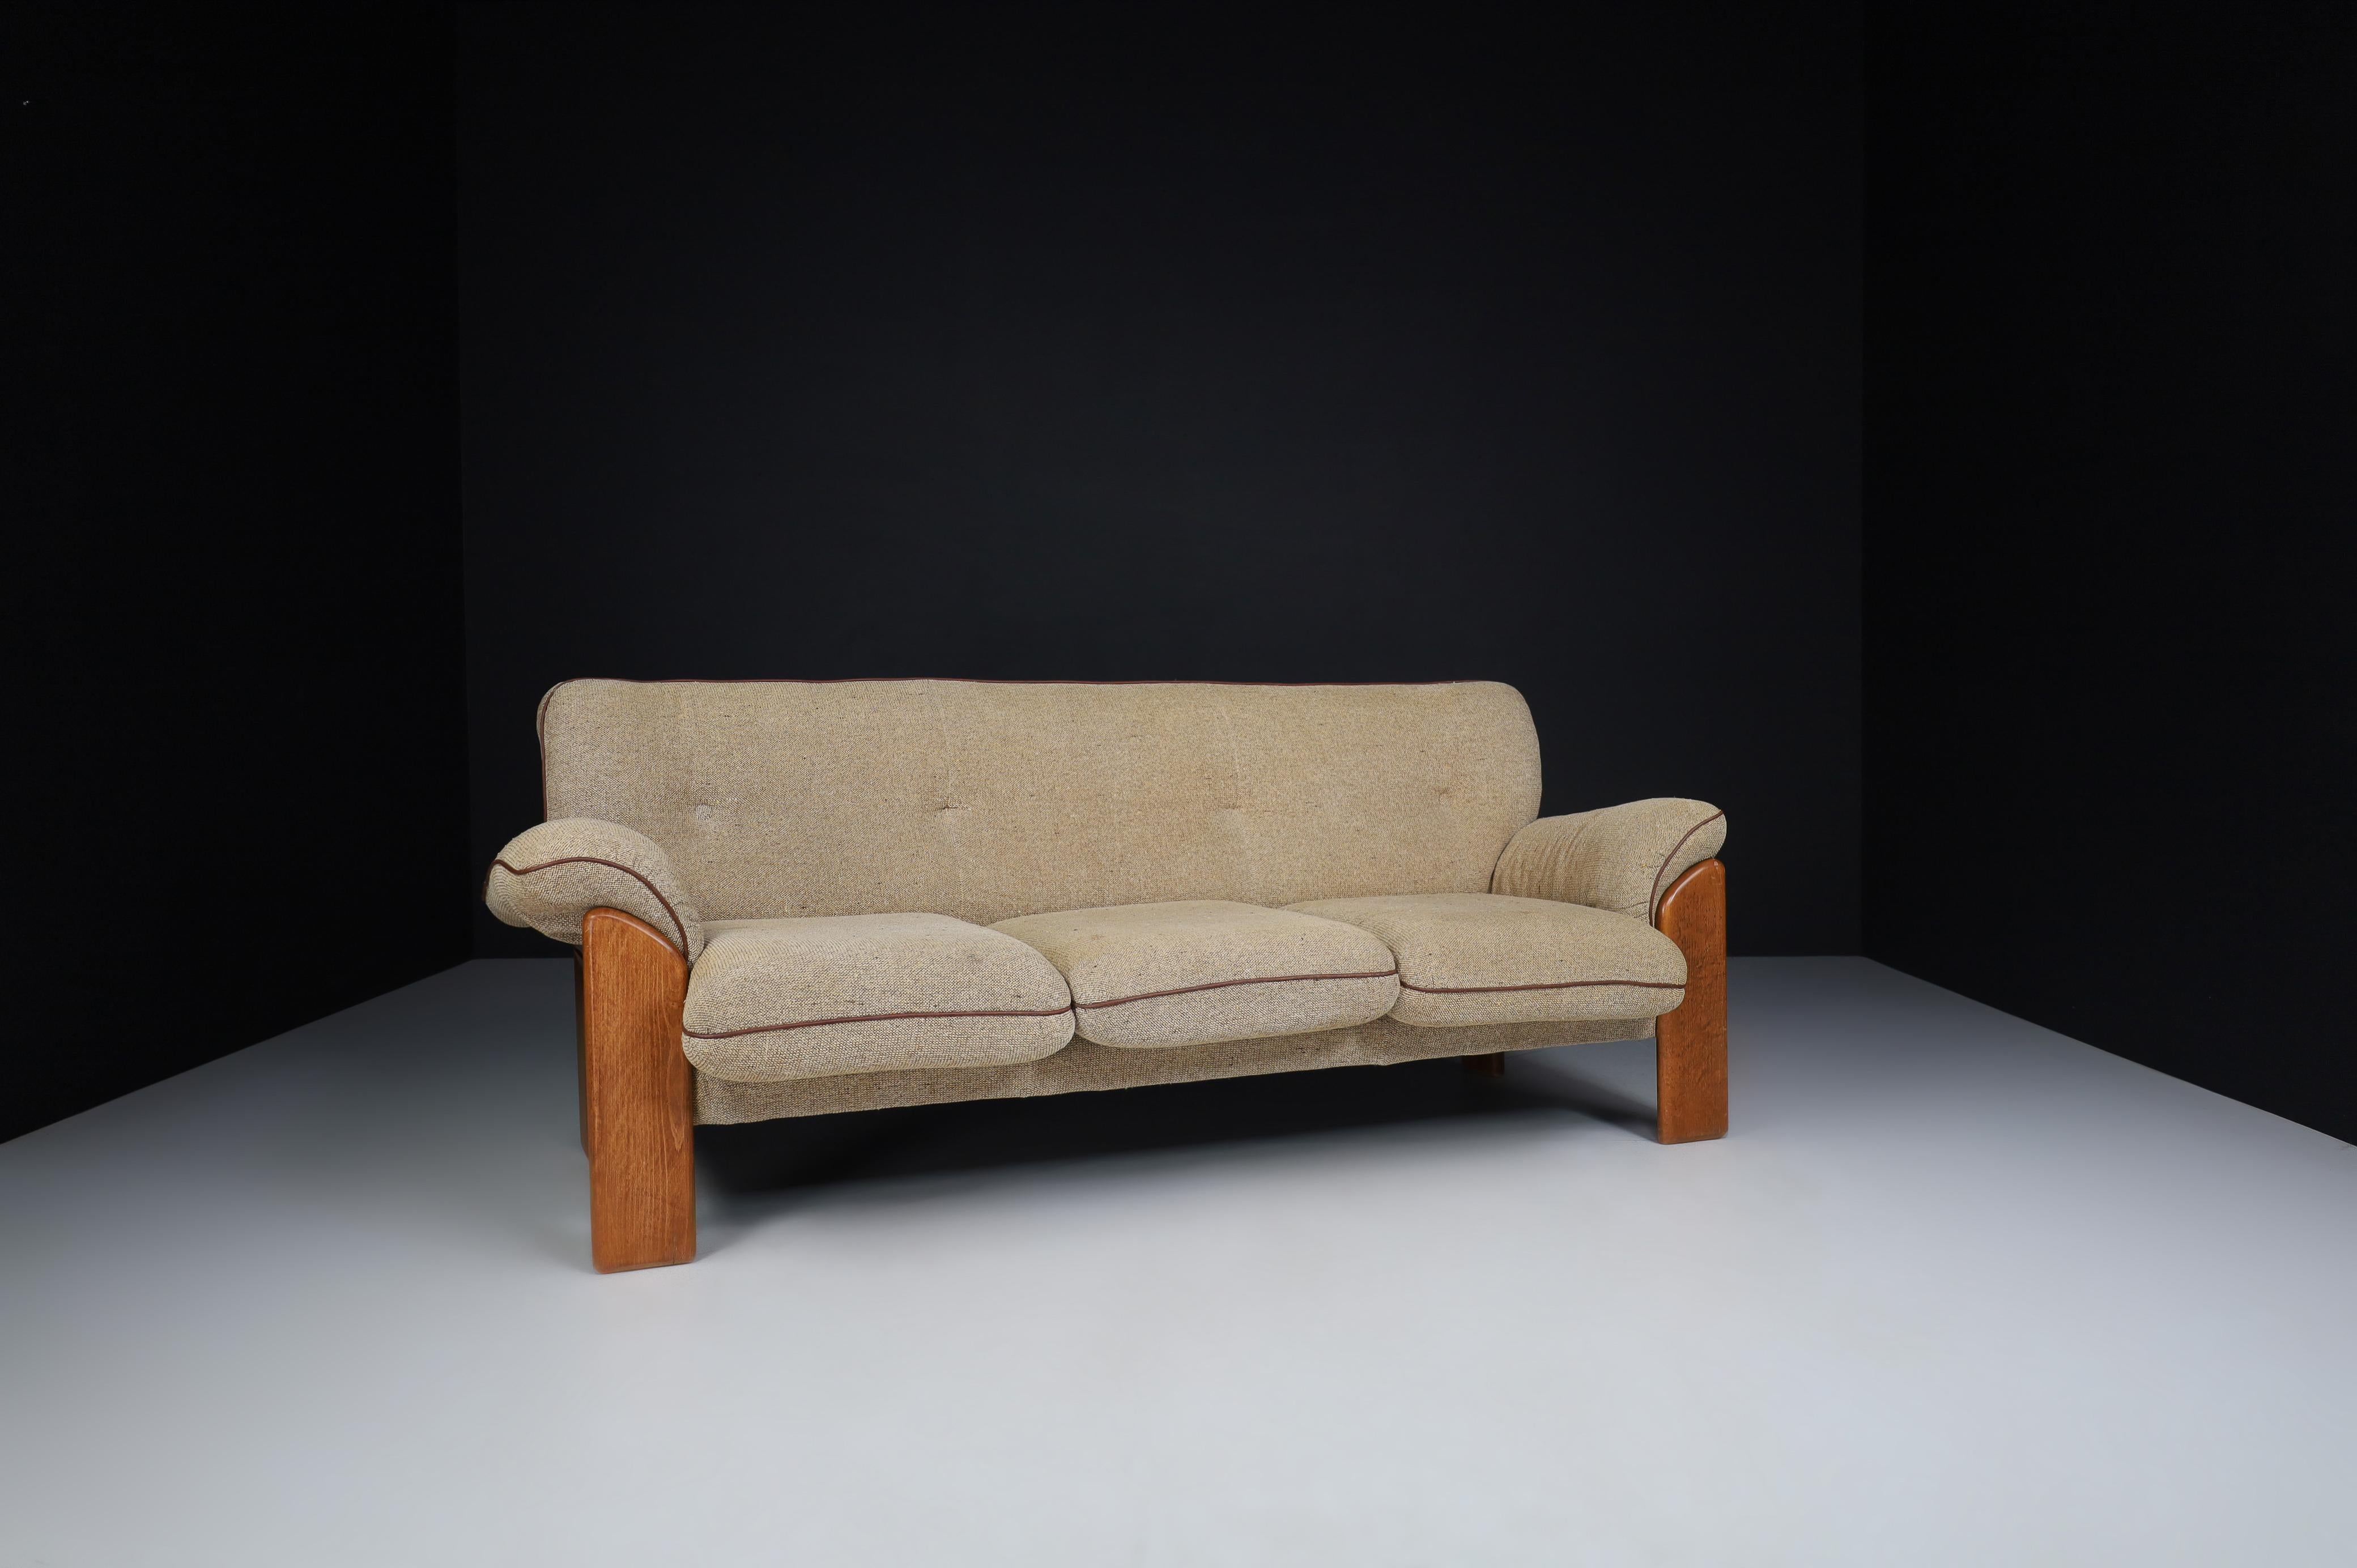 Mario Marenco for Mobil Girgi lounge sofa in walnut and original fabric Italy 1970s.

This beautiful walnut sofa was designed by Mario Marenco for Mobil Girgi in Italy during the 1970s. It features angled front legs that extend to the sides and